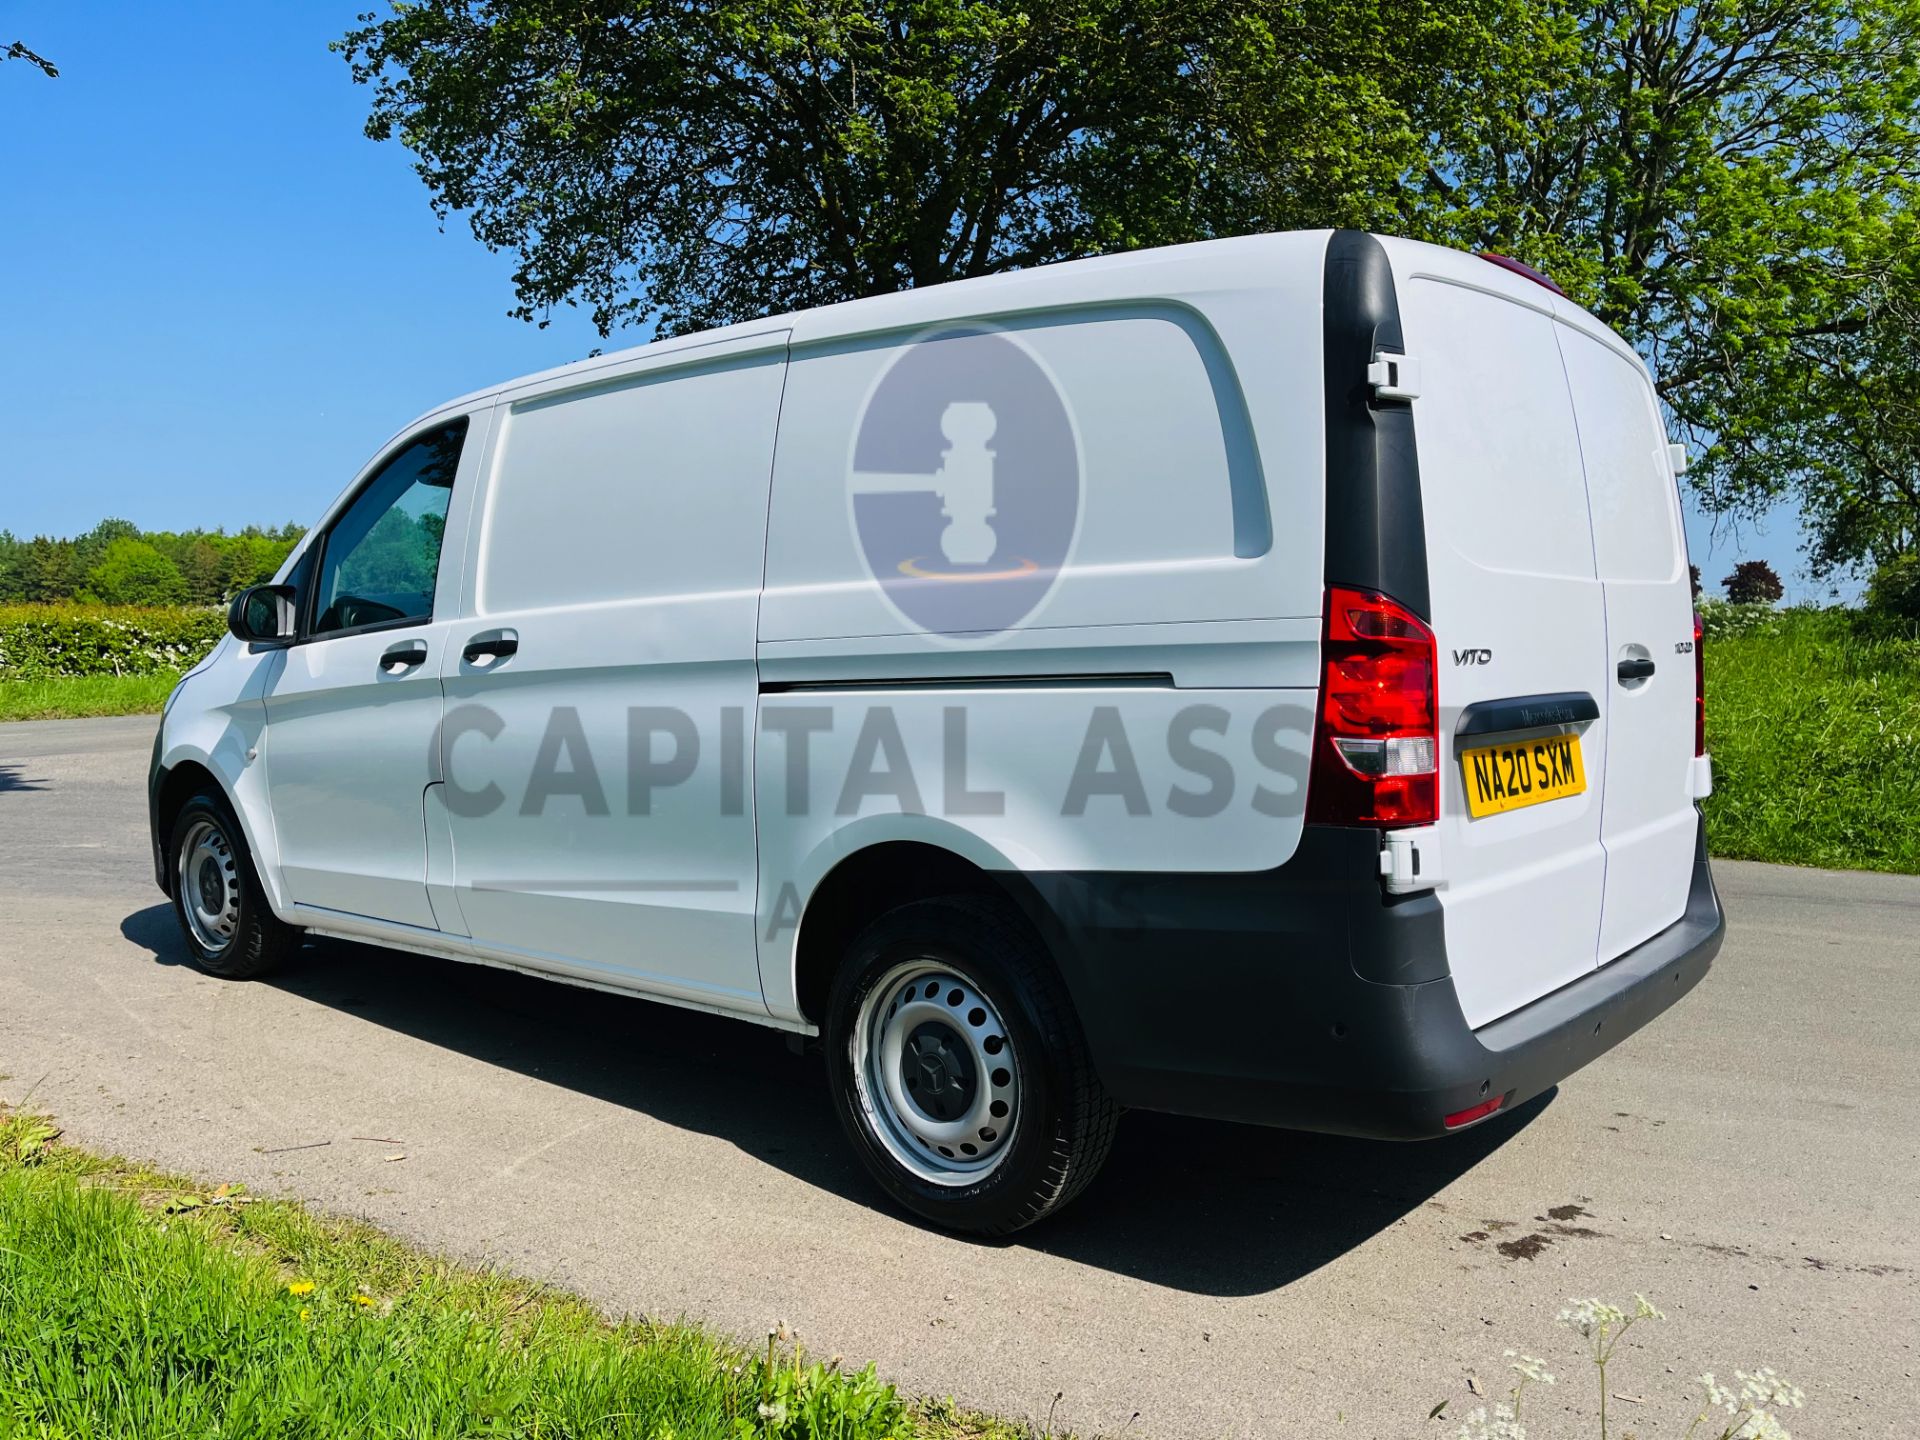 (ON SALE) MERCEDES VITO 110CDI "PURE" LWB (20 REG) ONLY 66K MILES - 1 OWNER - EURO 6 - CRUISE - Image 9 of 26